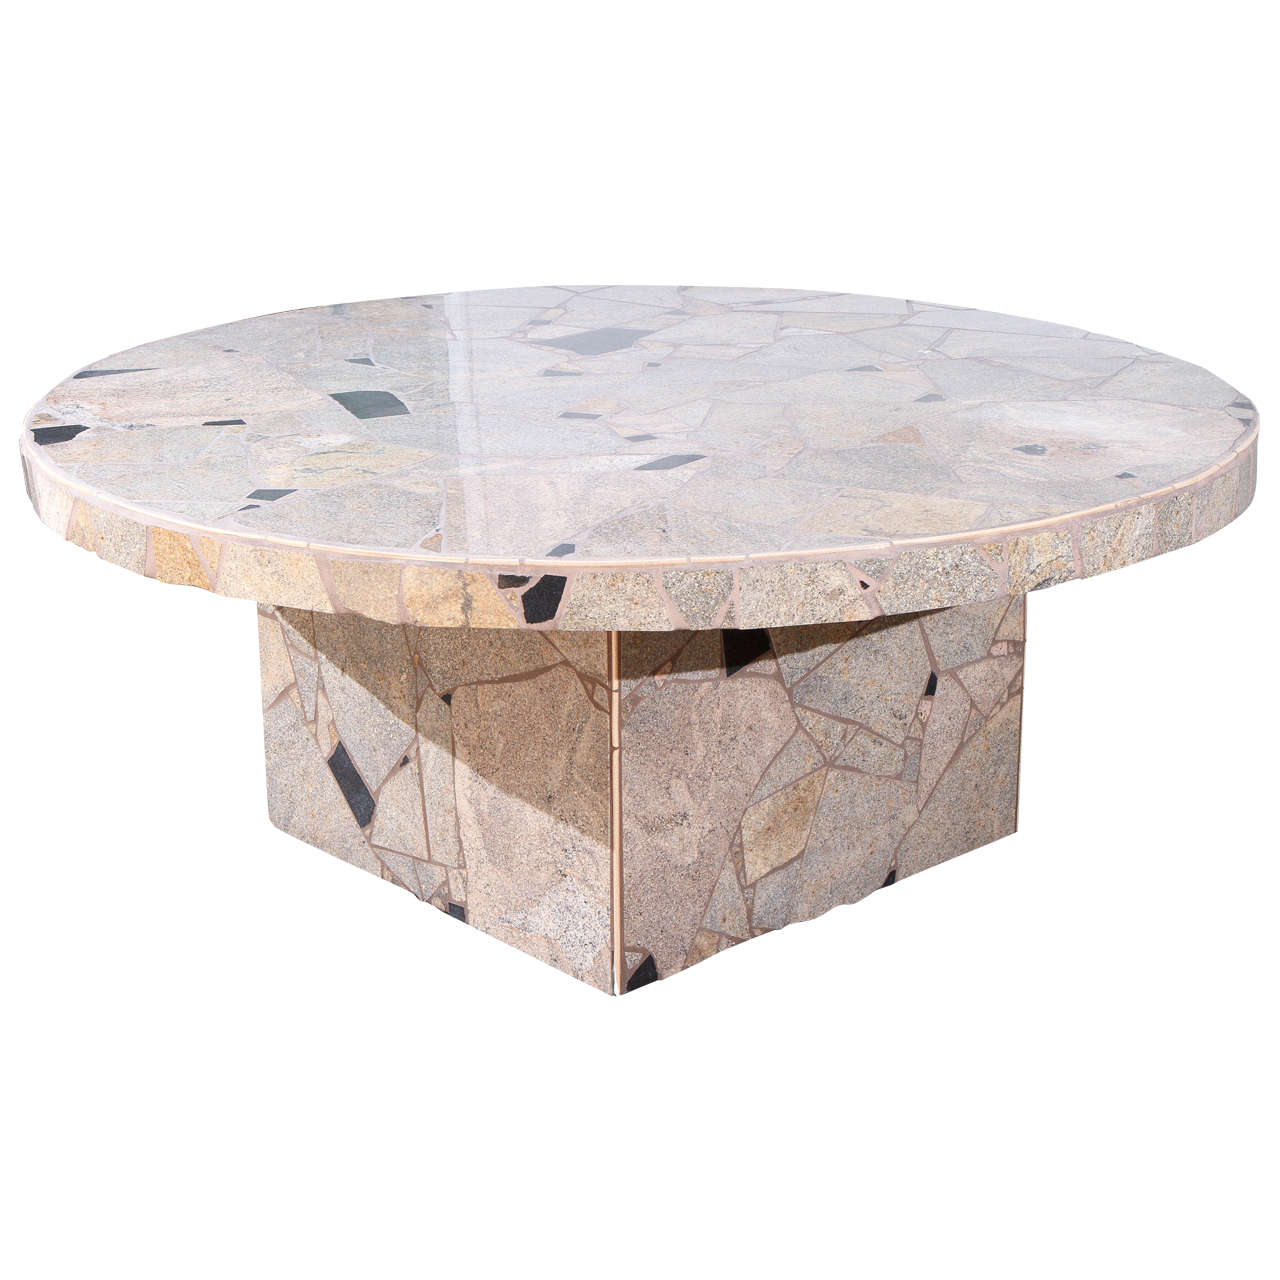 Fabulous Stone Mosaic Outdoor Dining Table by Marlo Bartels for Steve Chase